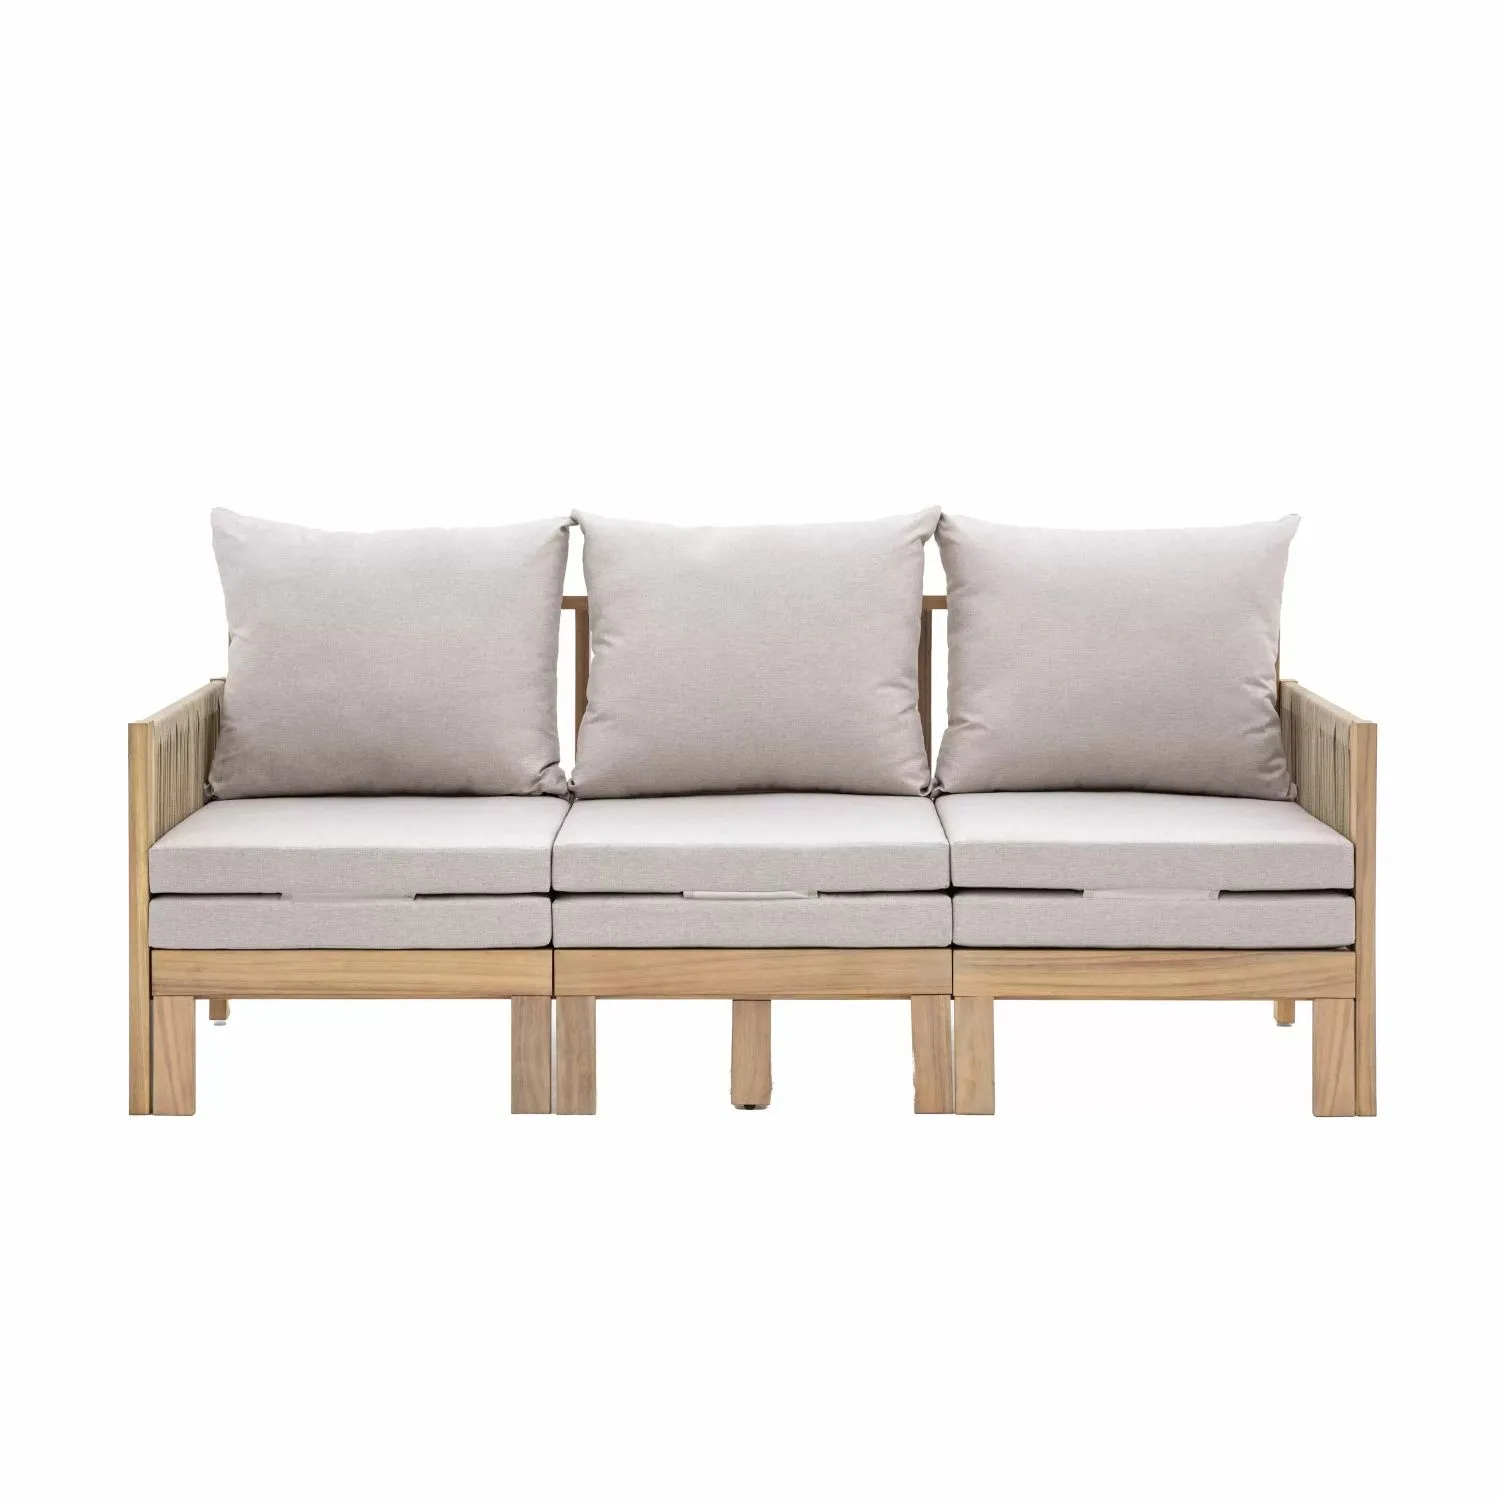 Acacia Wood Outdoor Pull Out Sofa with Double Cushions